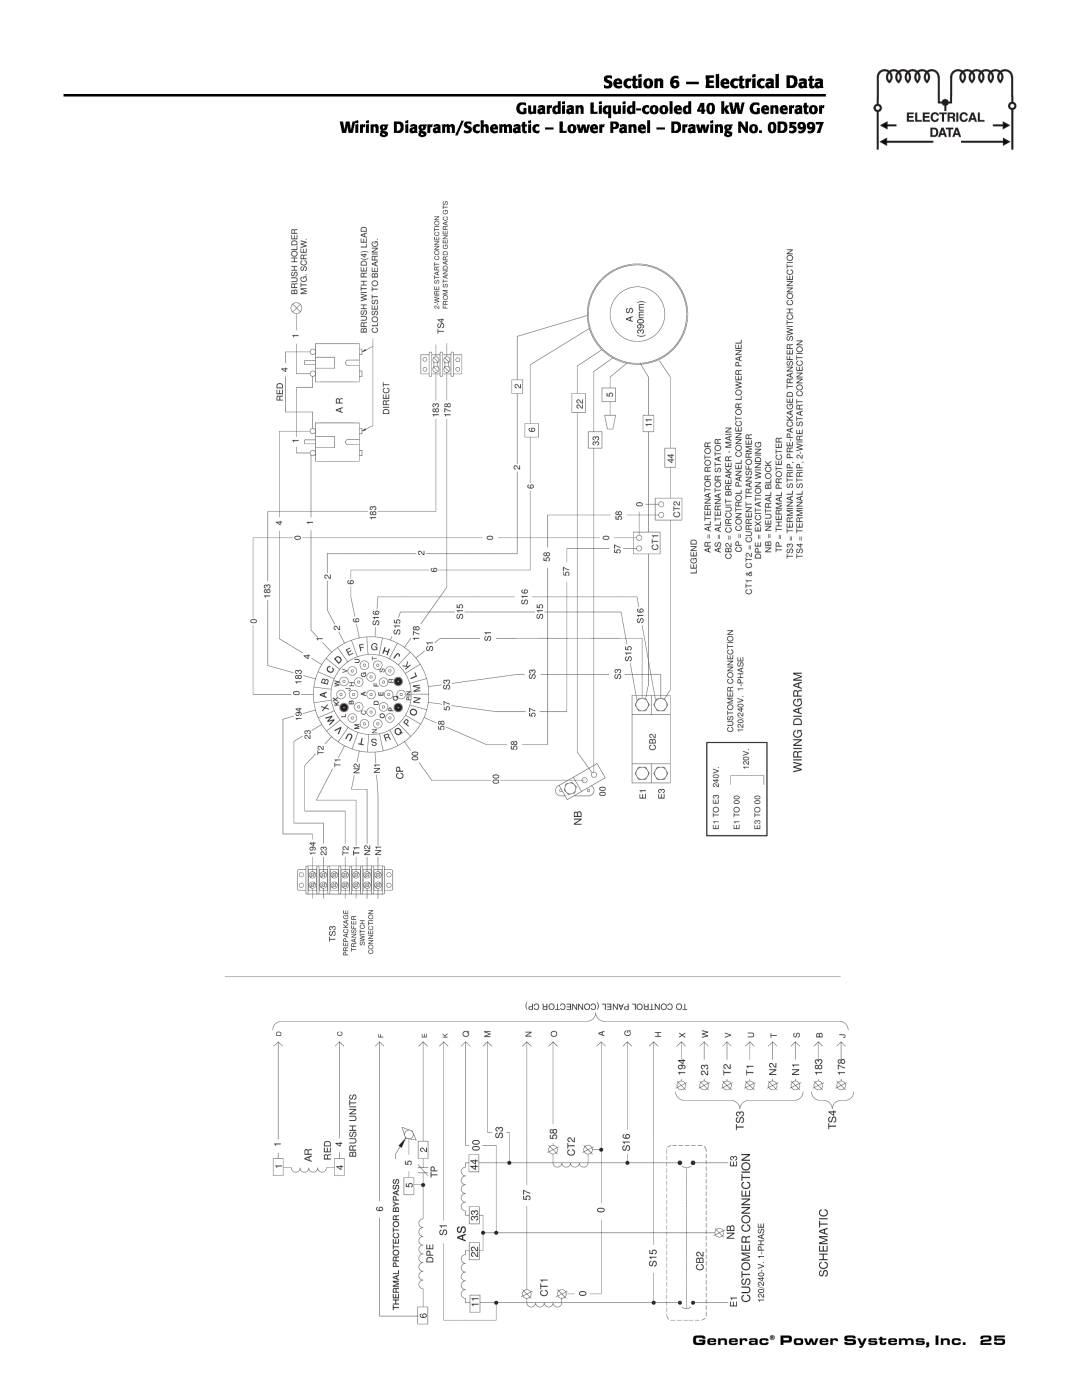 Generac Power Systems 43735 Section, Electrical Data, kW Generator No. 0D5997, Generac Power Systems, Inc, Schematic 